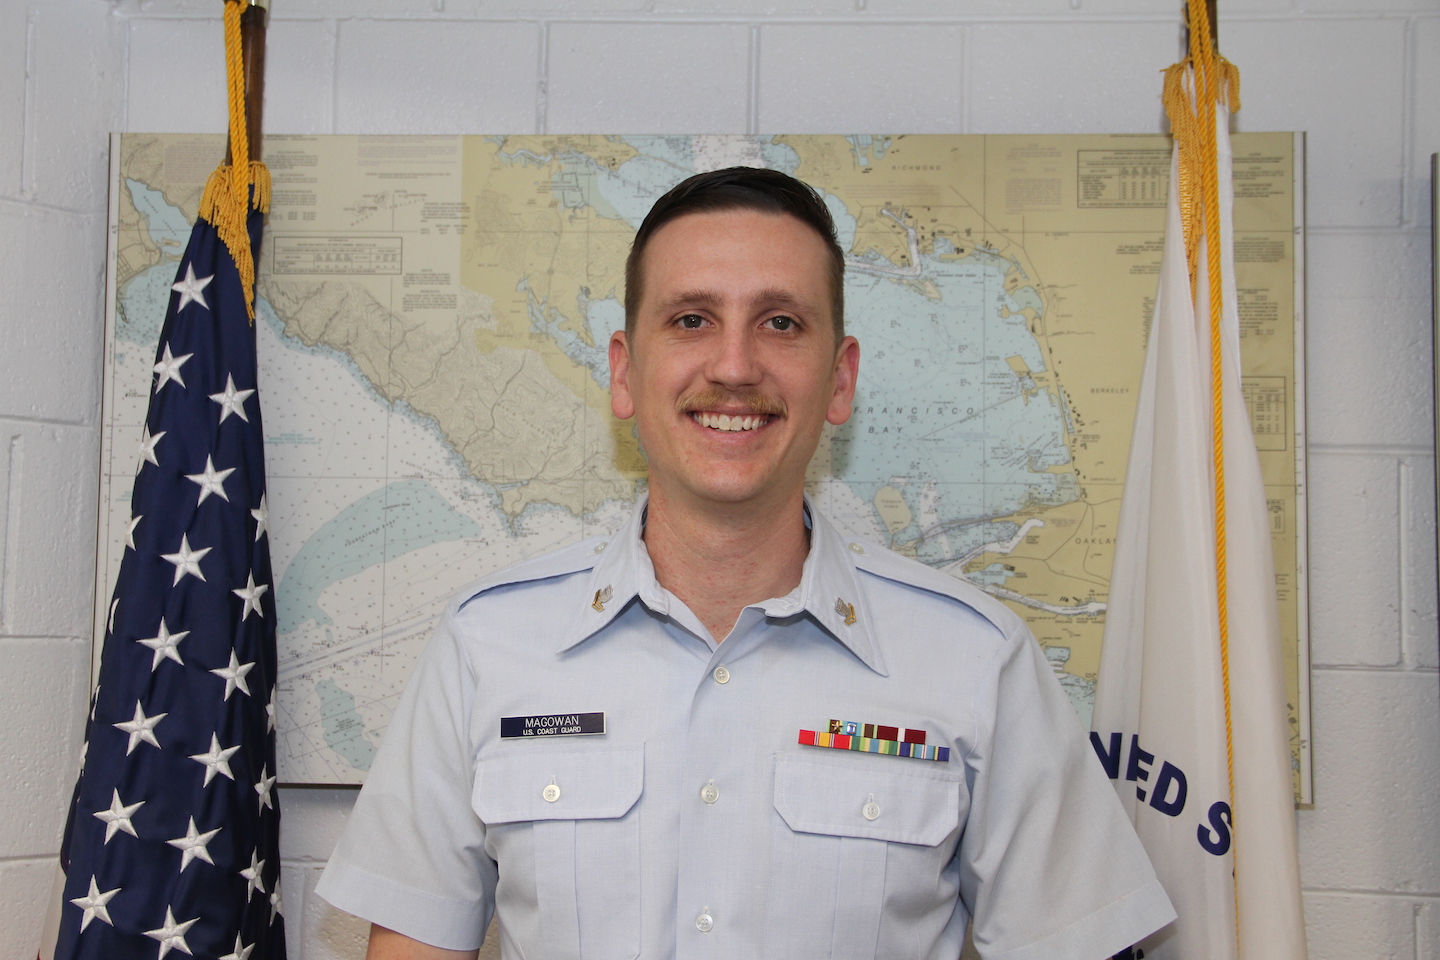 ASU grad  wearing his Navy uniform in front of a map and standing next to an American flag.